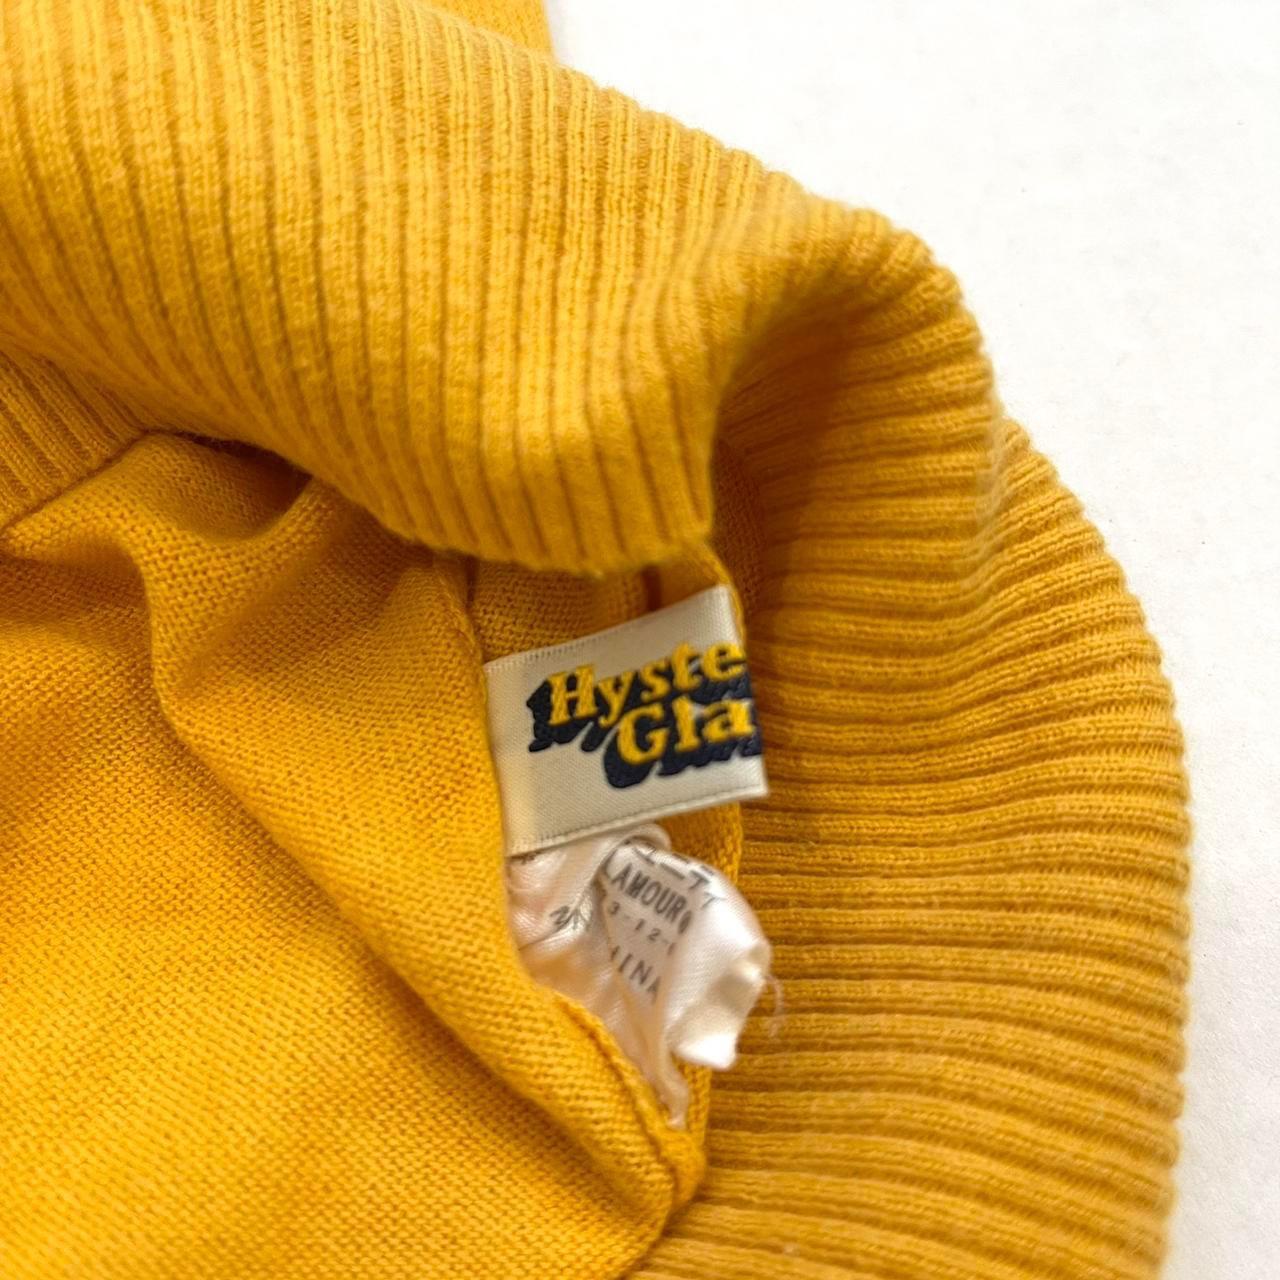 Hysteric Glamour “Double The Pleasure” yellow knit... - Depop